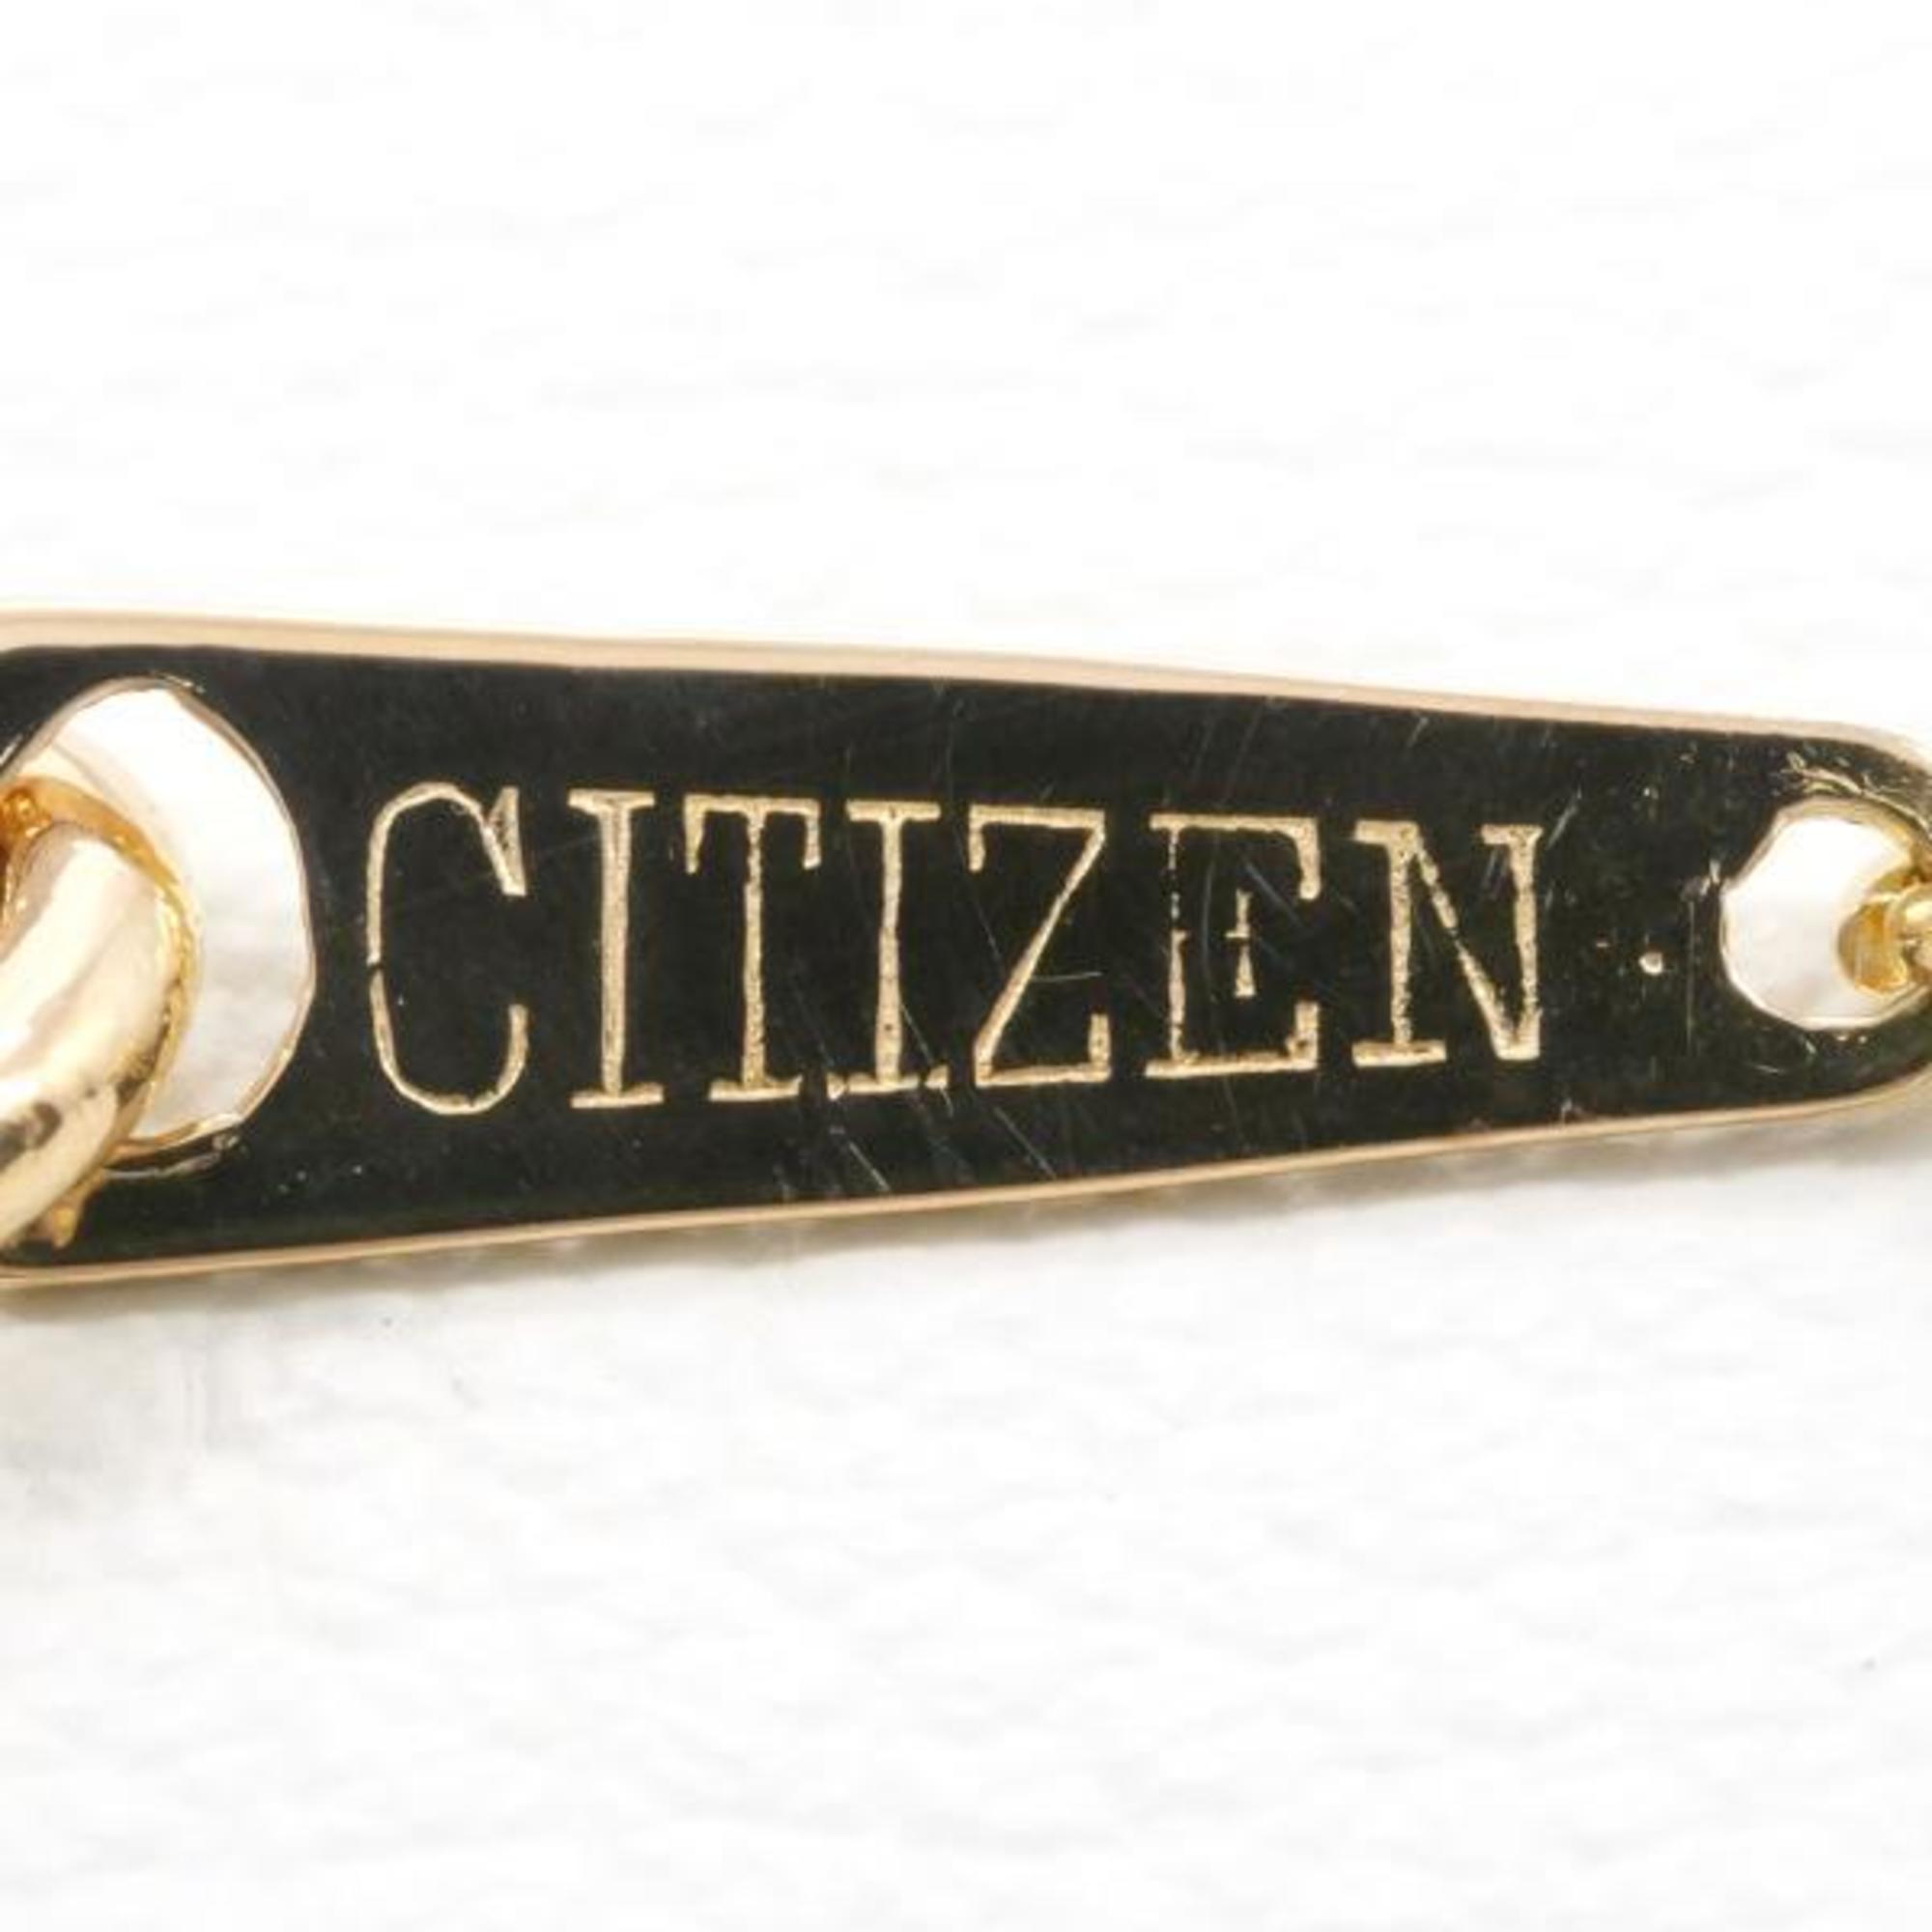 Citizen K18YG necklace, total weight approx. 5.1g, 42cm